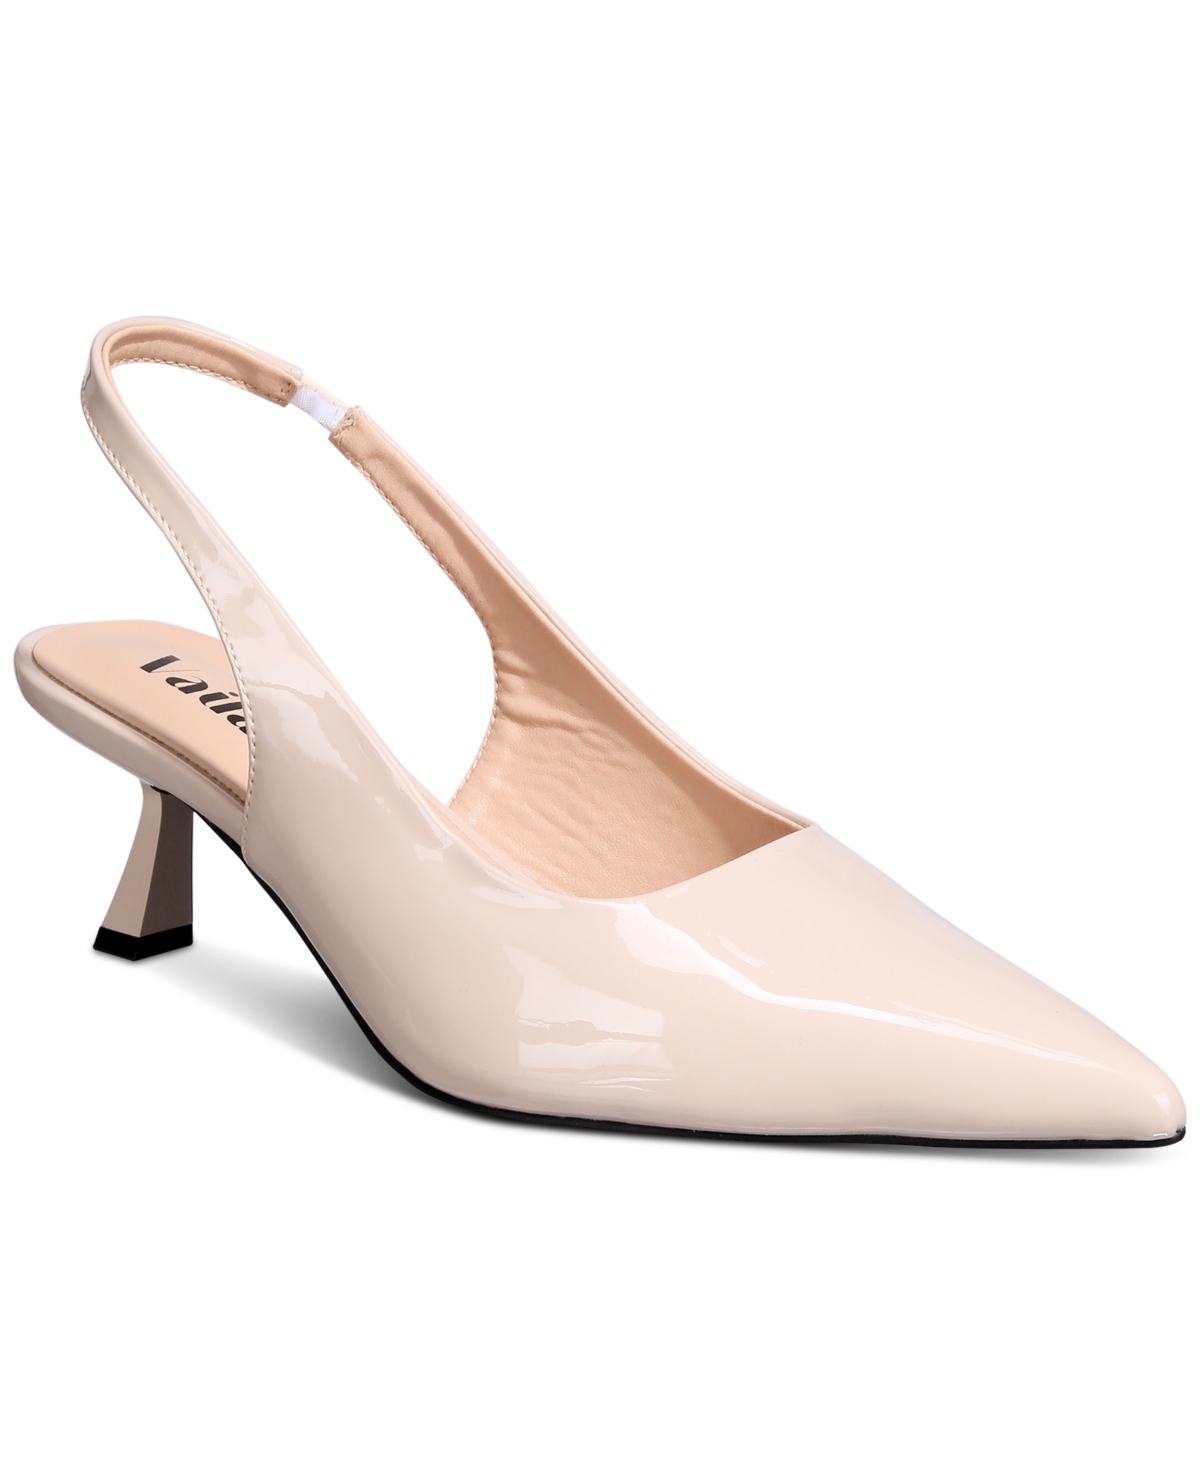 Women's Lisa Pointed-Toe Slingback Pumps-Extended sizes 9-14 - Pastel Pin